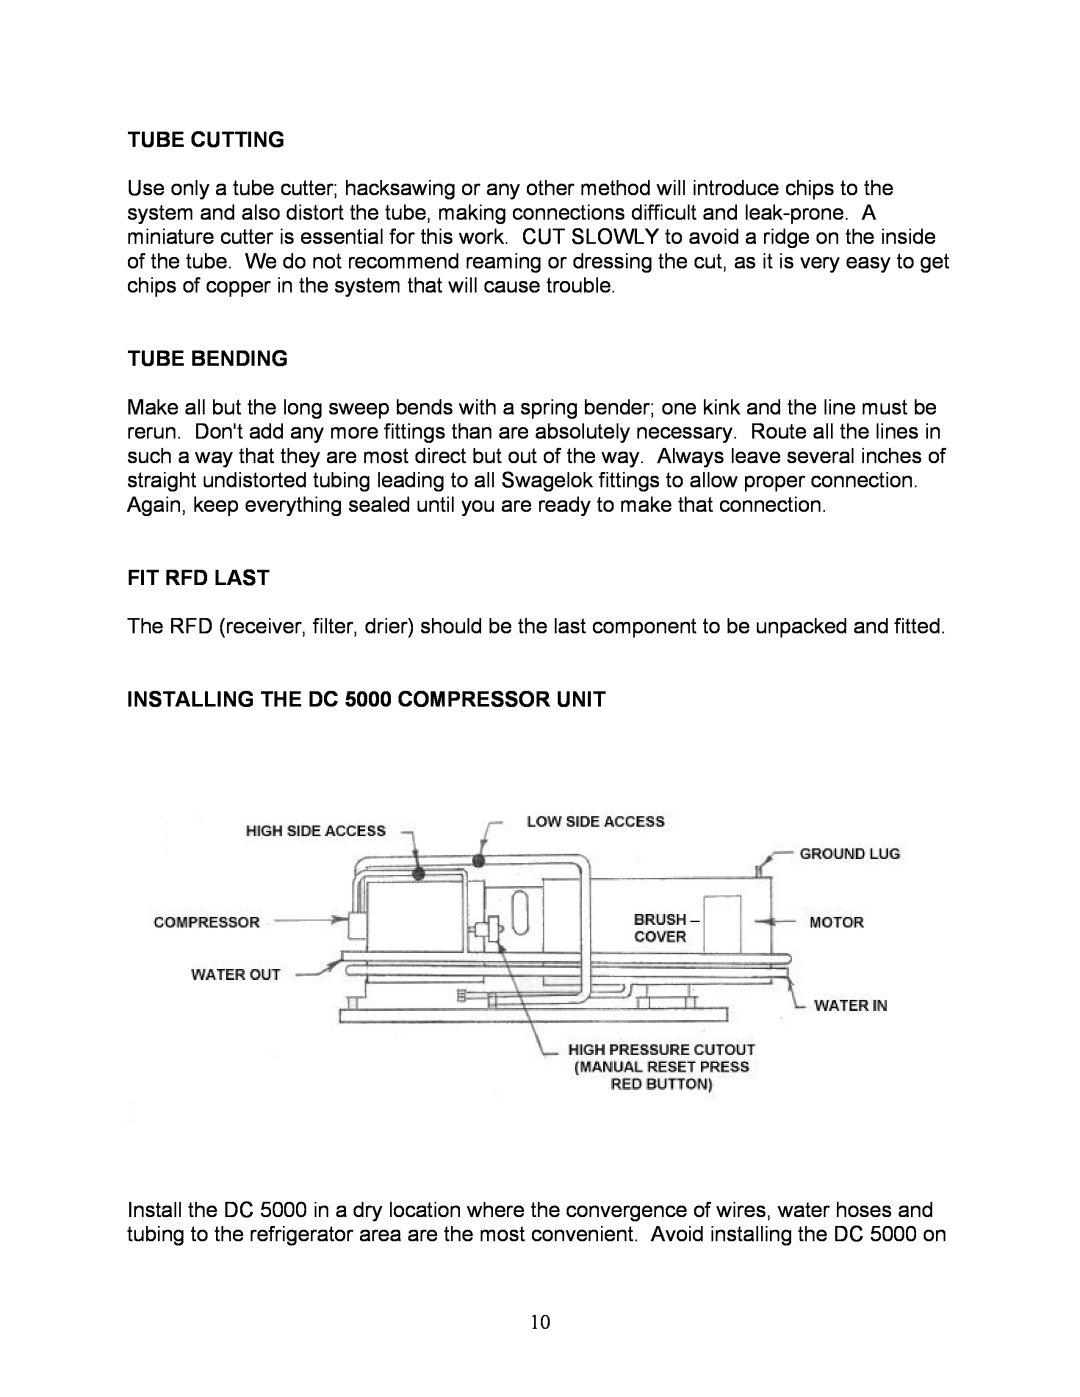 Sea Frost installation instructions Tube Cutting, Tube Bending, Fit Rfd Last, INSTALLING THE DC 5000 COMPRESSOR UNIT 